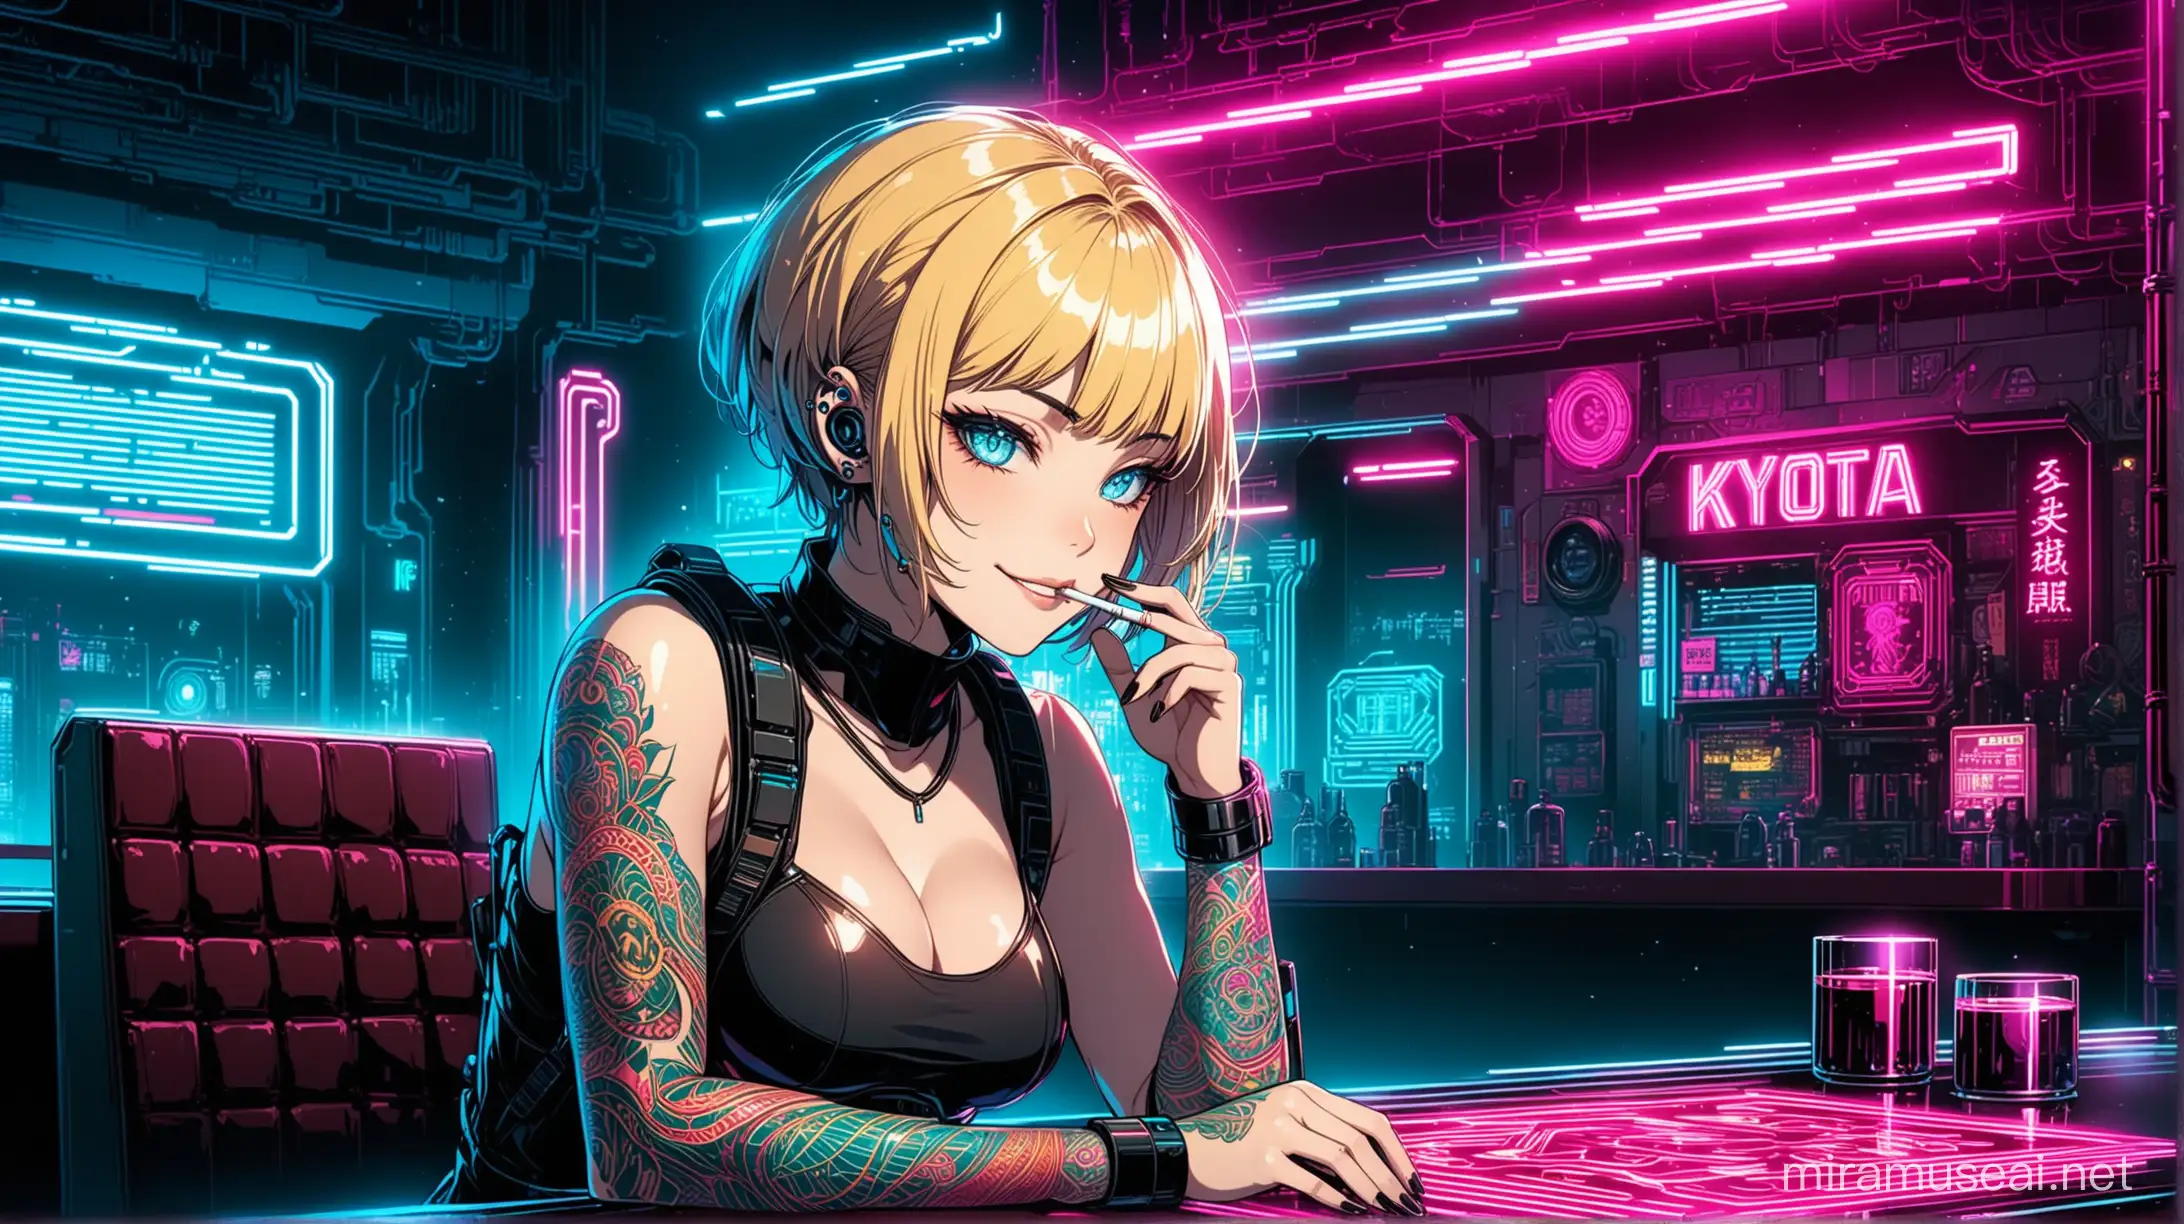 Blonde Cyberpunk Anime Character in Futuristic Bar with Neon Lights